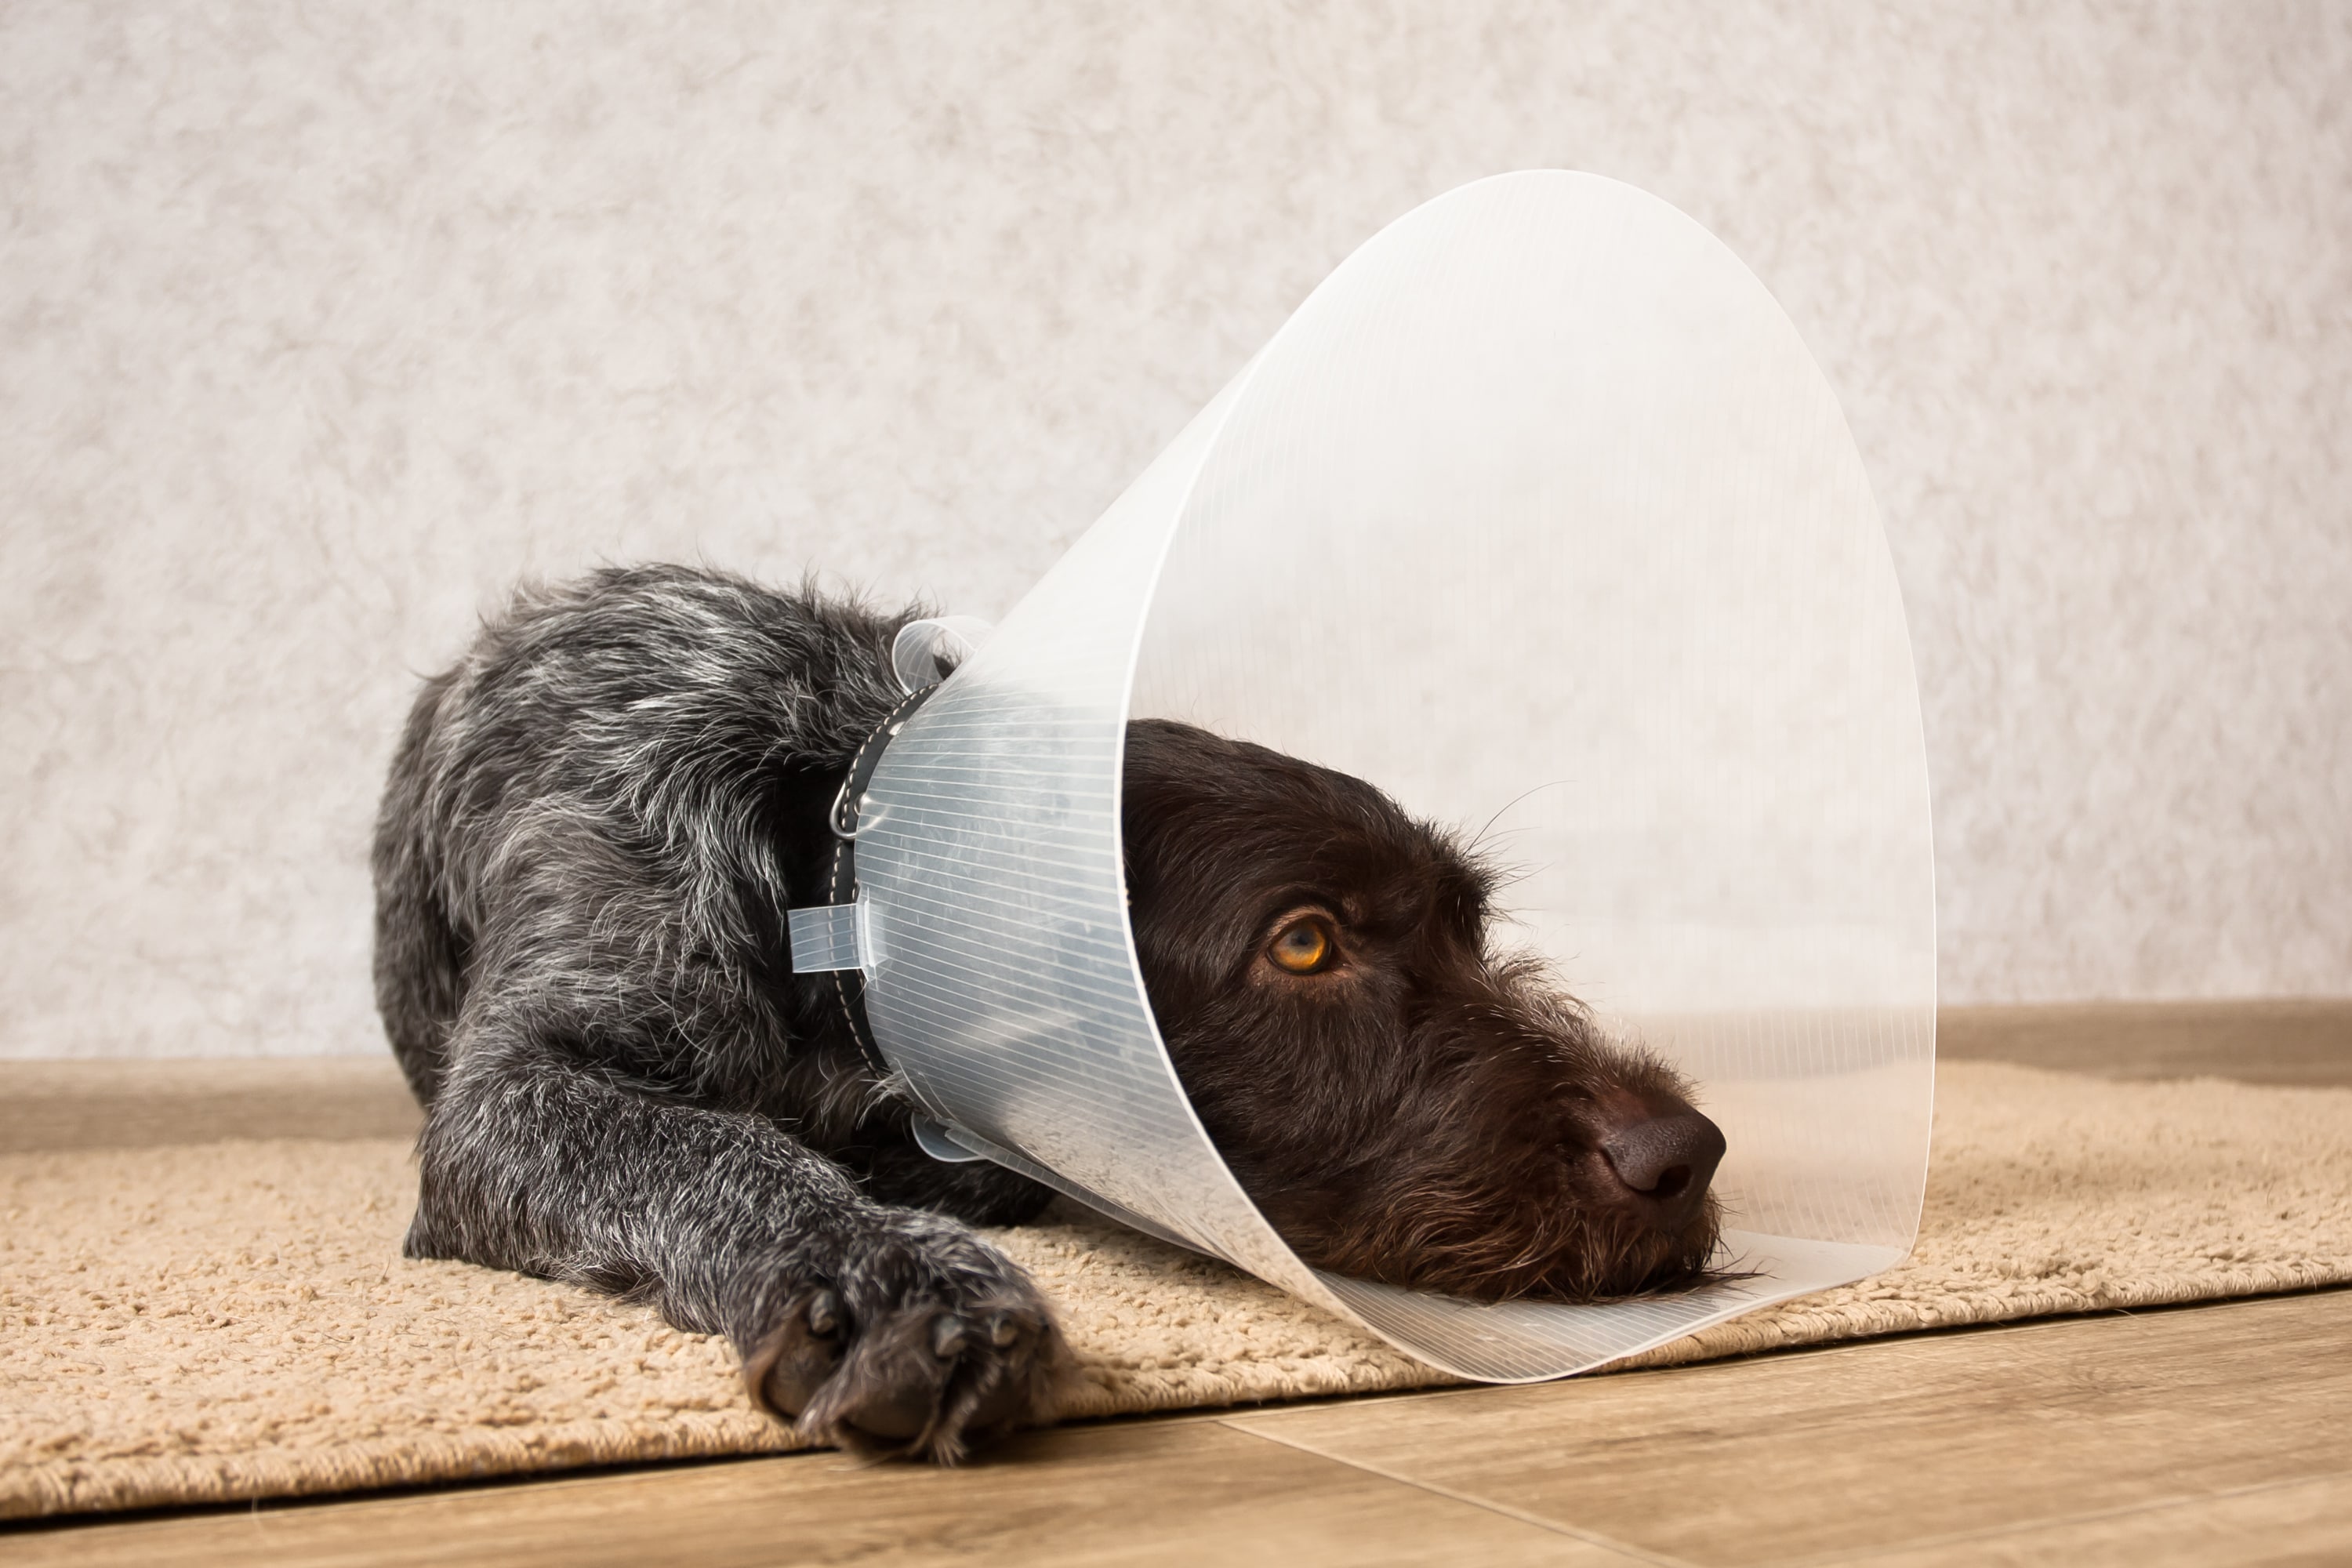 how to make a cone for your dog